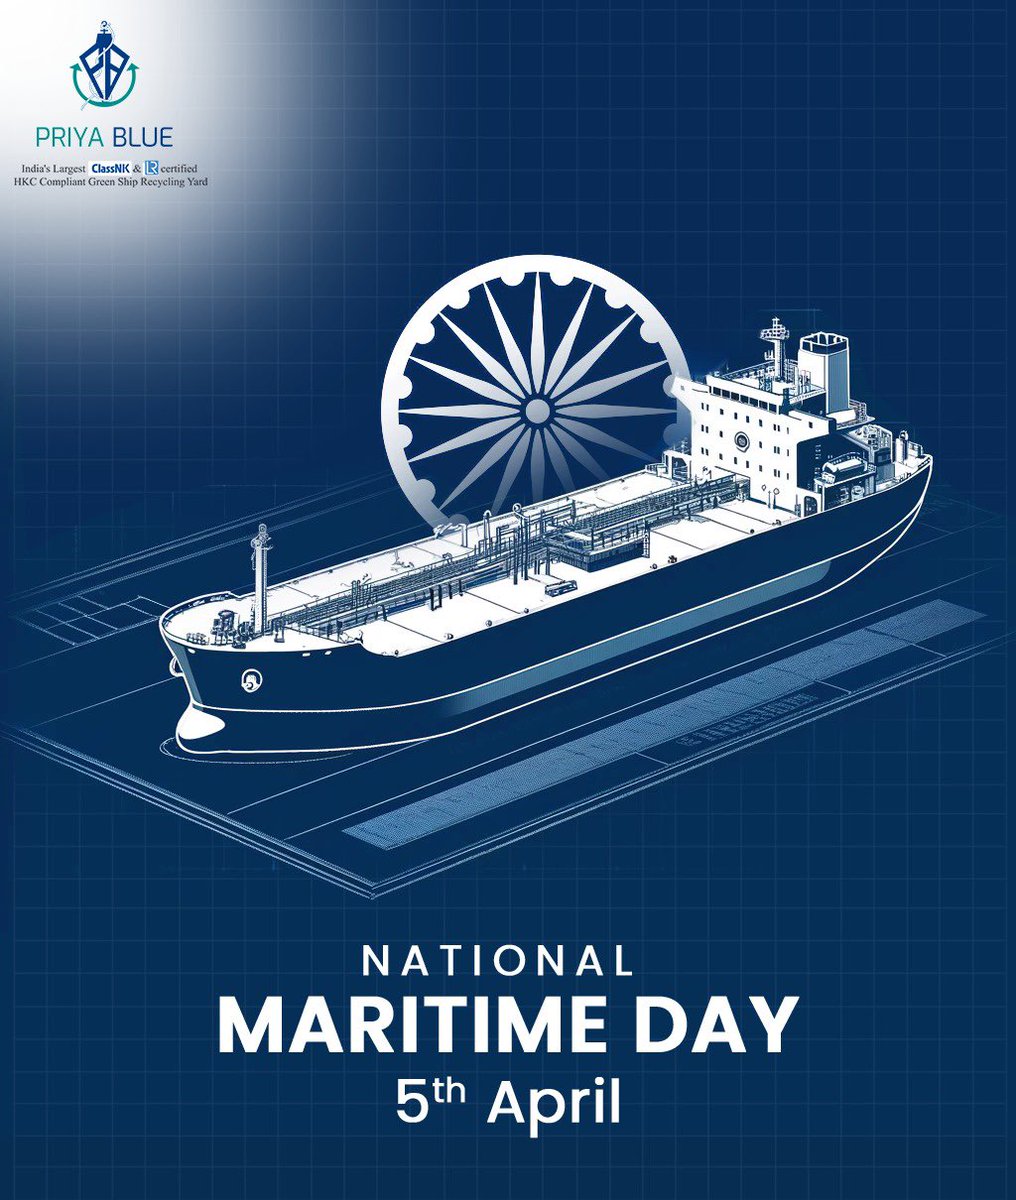 Celebrating the unsung heroes of the sea and their invaluable contributions to our world, with a special nod to the spirit of India and the crucial role of ship recyclers.  🌊⚓️✨🇮🇳#NationalMaritimeDay #SailWithPride #OceanExplorers #NavigatingSuccess #PriyaBlueAdventures